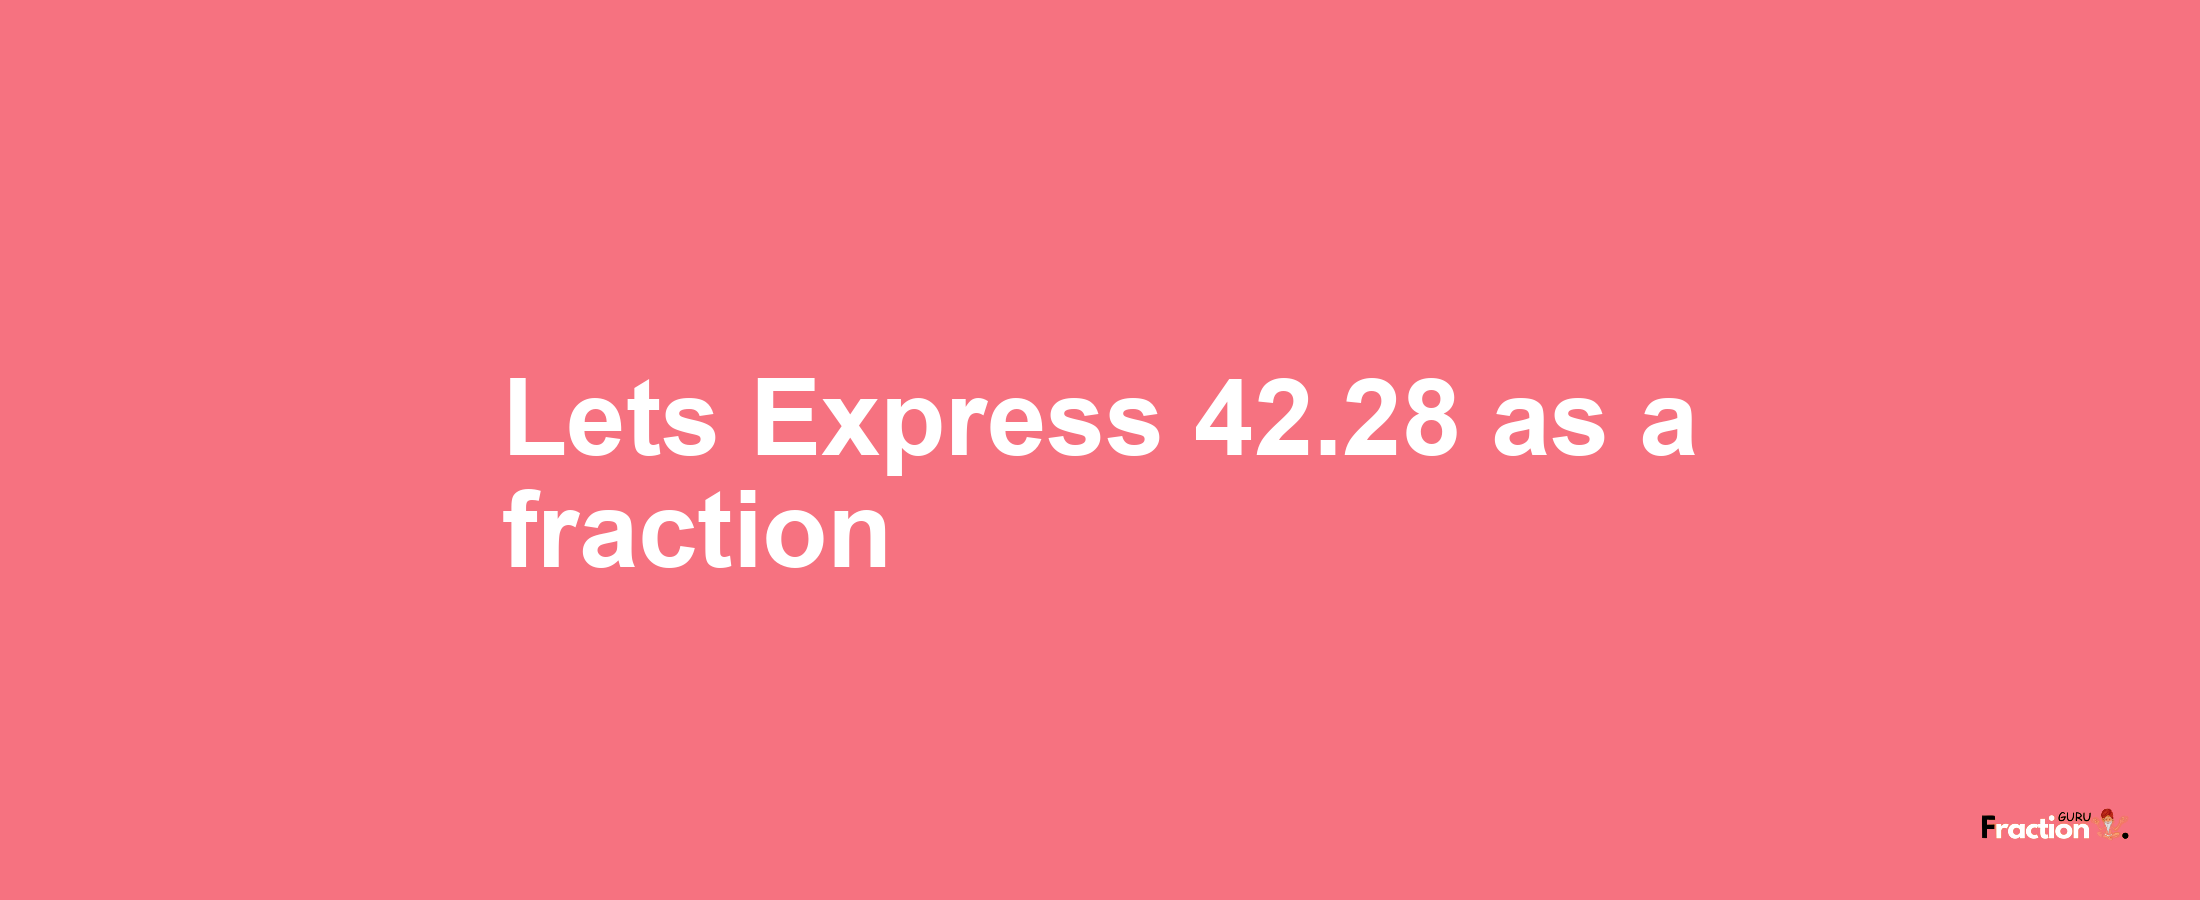 Lets Express 42.28 as afraction